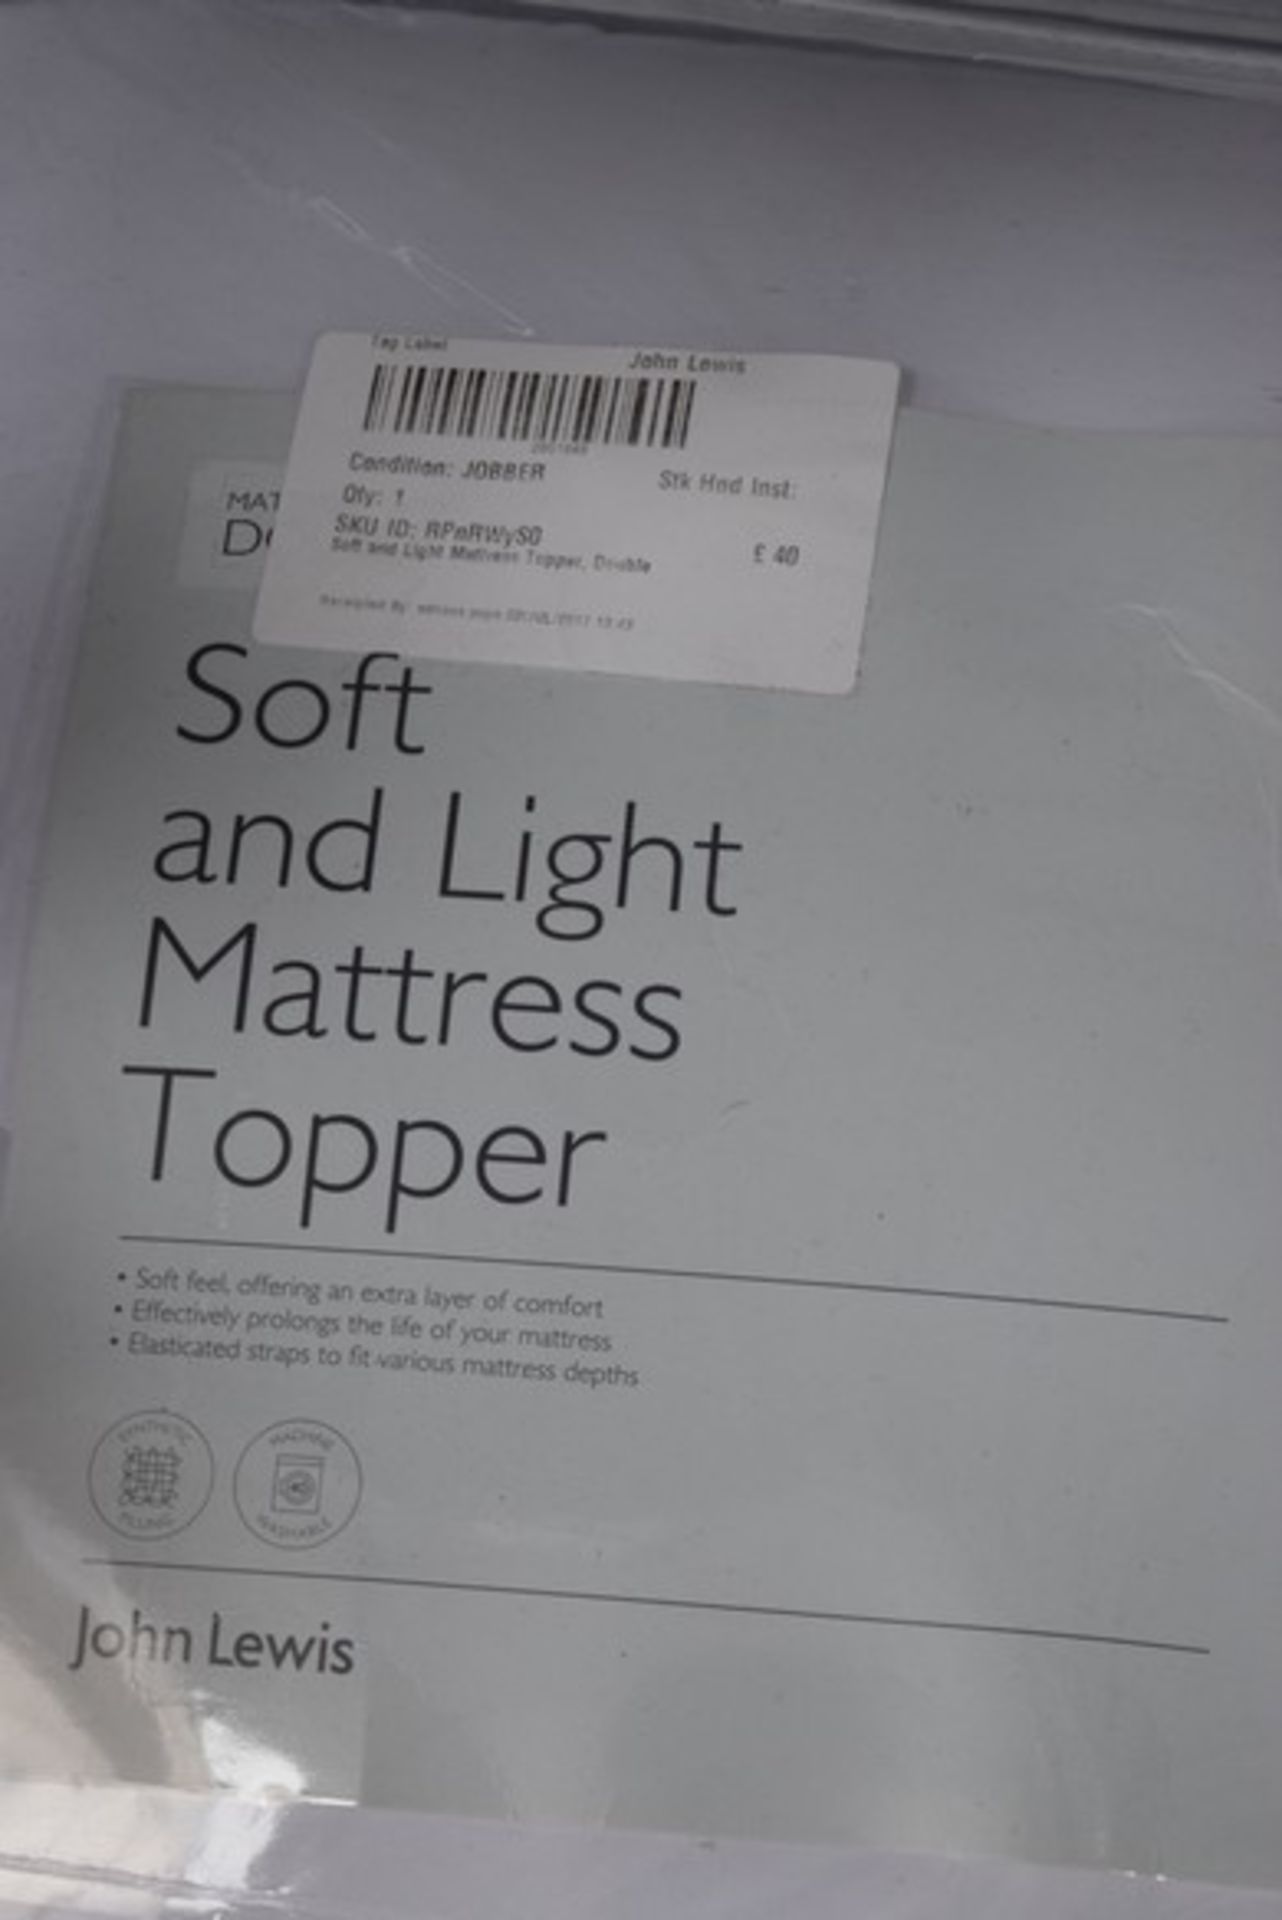 1 x DESIGNER SOFT AND LIGHT MATTRESS TOPPER IN DOUBLE RRP £40 18.07.17 *PLEASE NOTE THAT THE BID